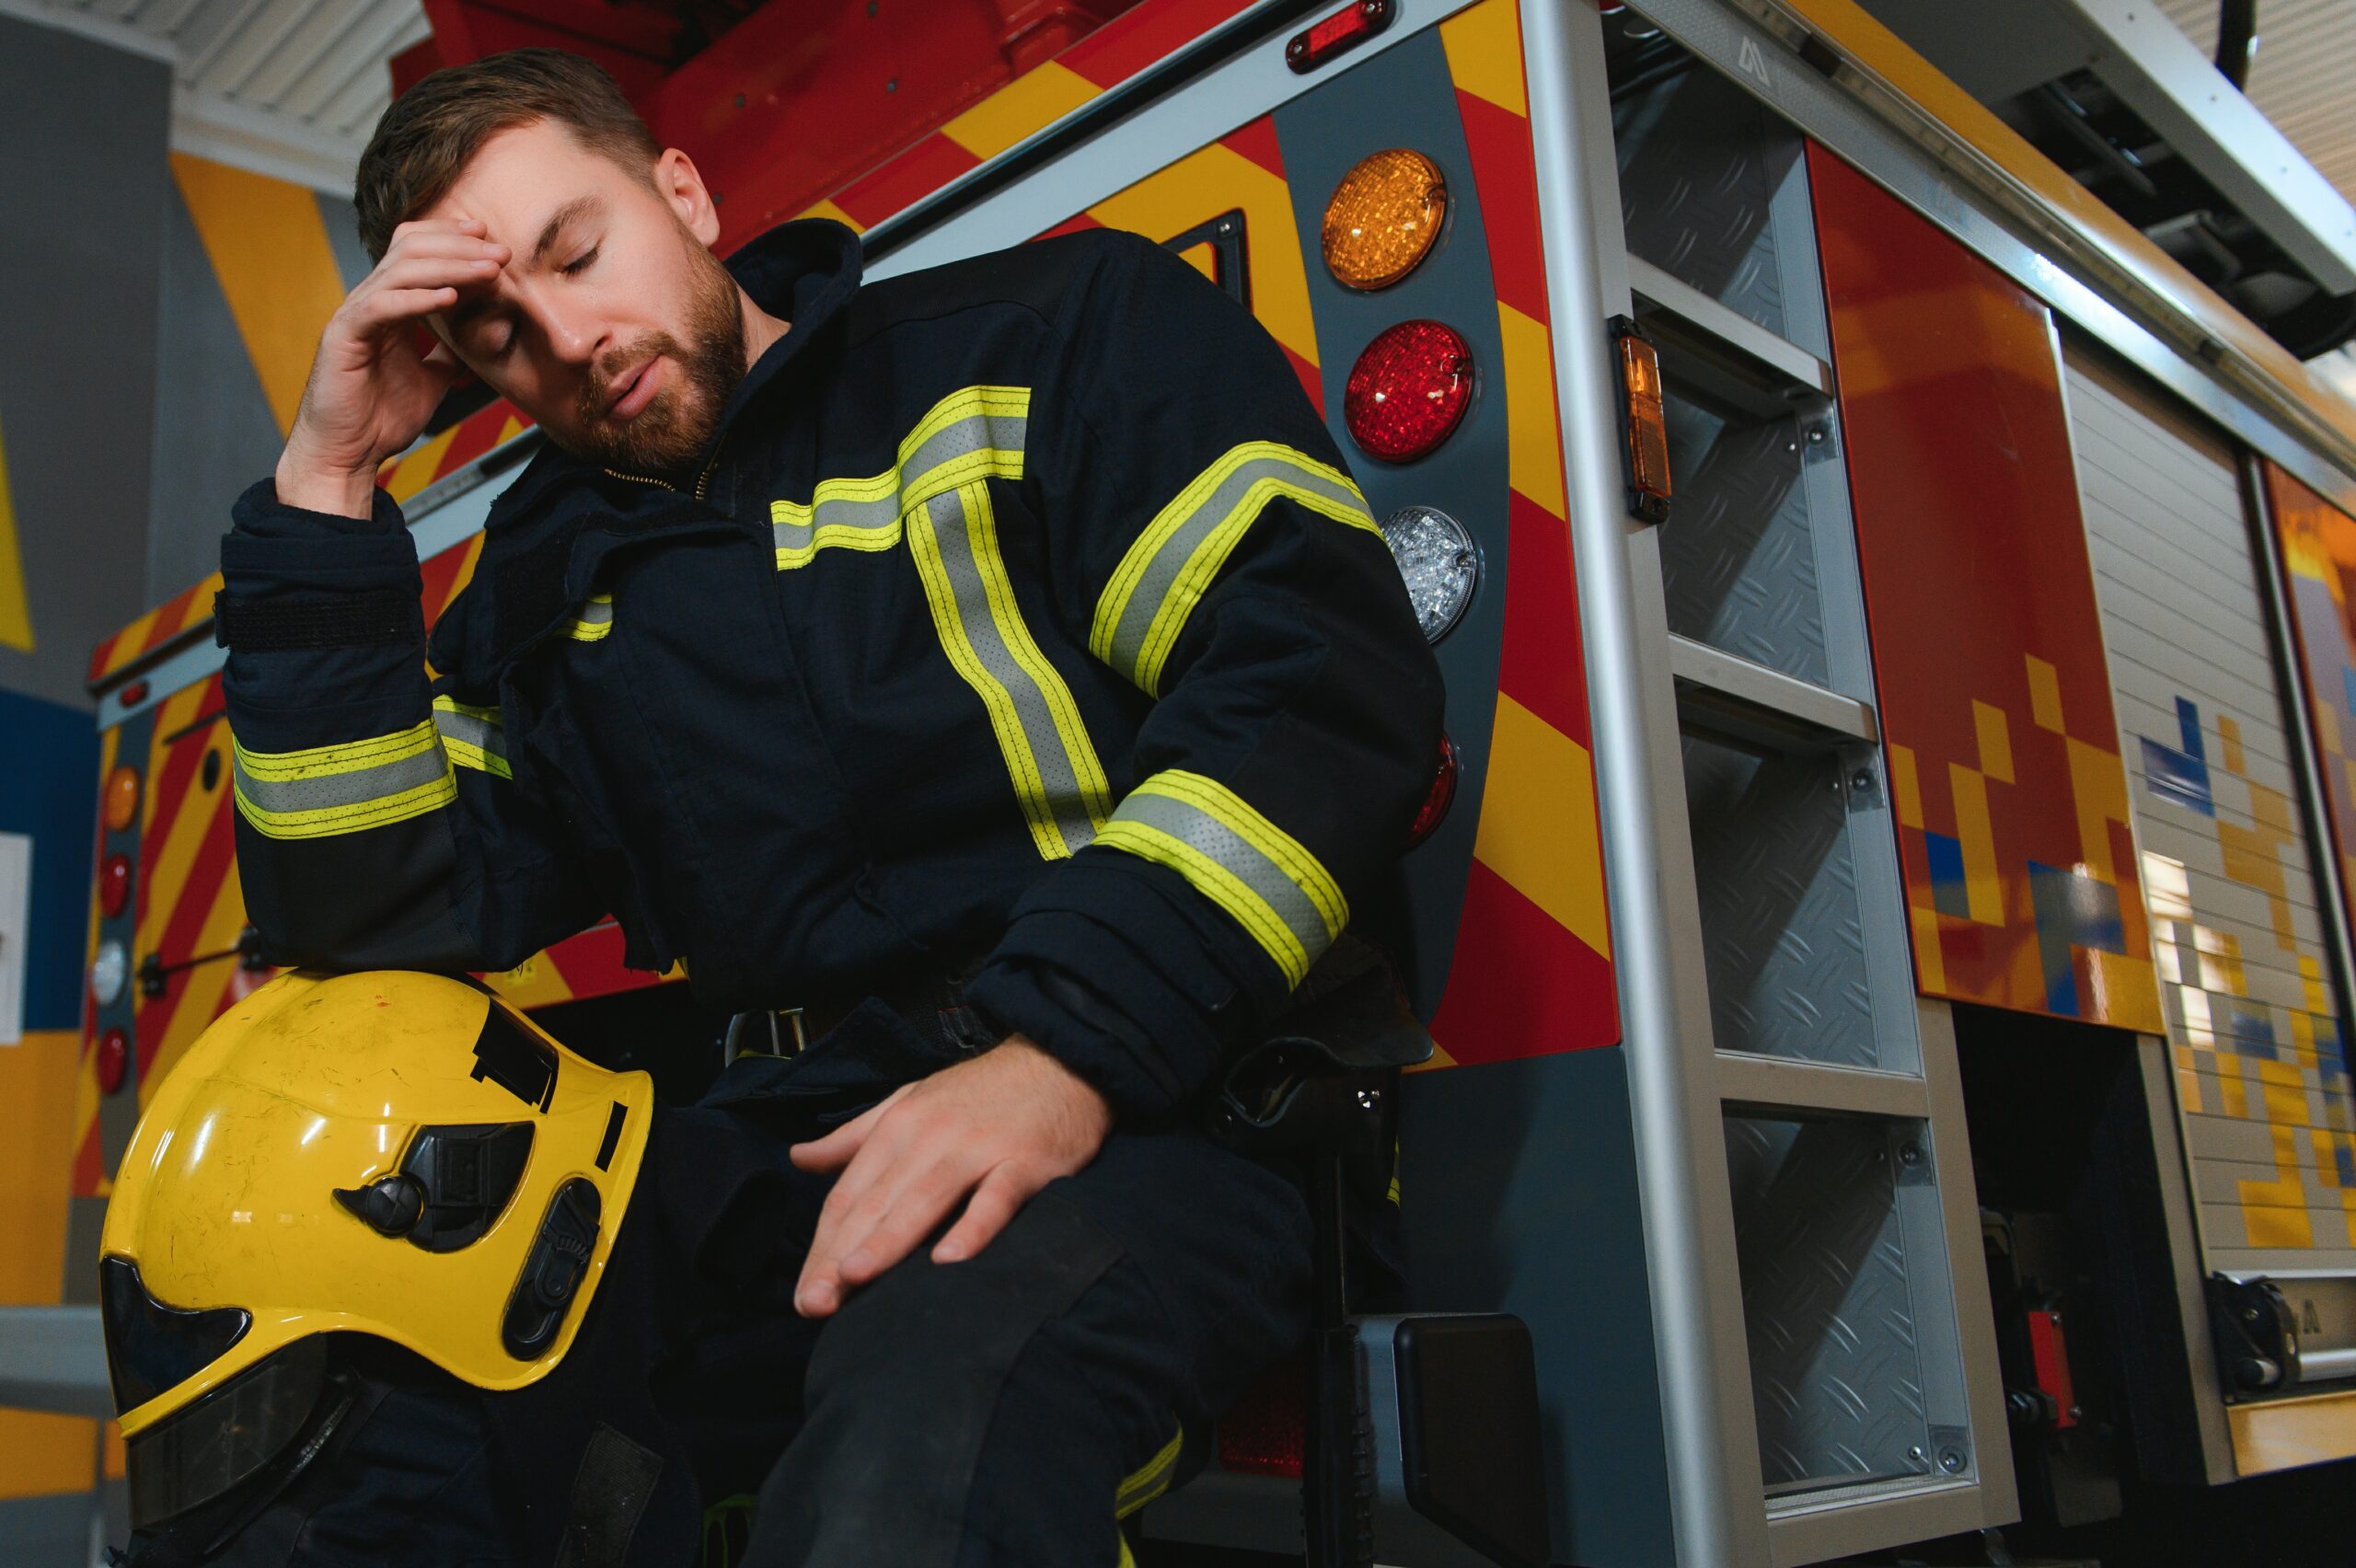 A firefighter with his hands on his head, dealing with trauma, representing the need for sensory modulation therapy to improve mental health for first responders and reduce PTSD symptoms.